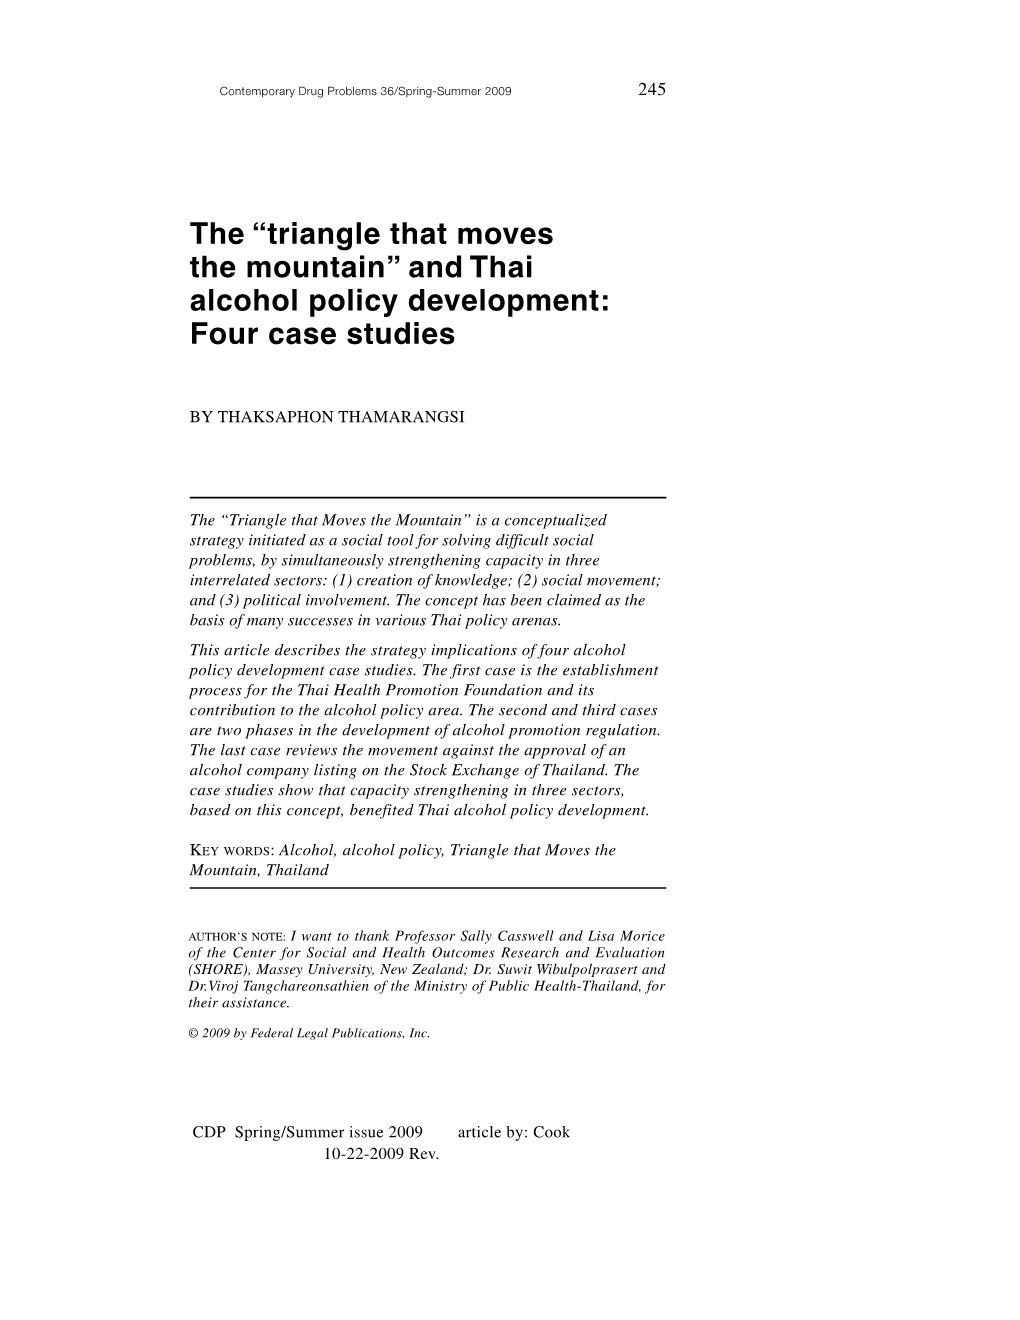 The “Triangle That Moves the Mountain” and Thai Alcohol Policy Development: Four Case Studies